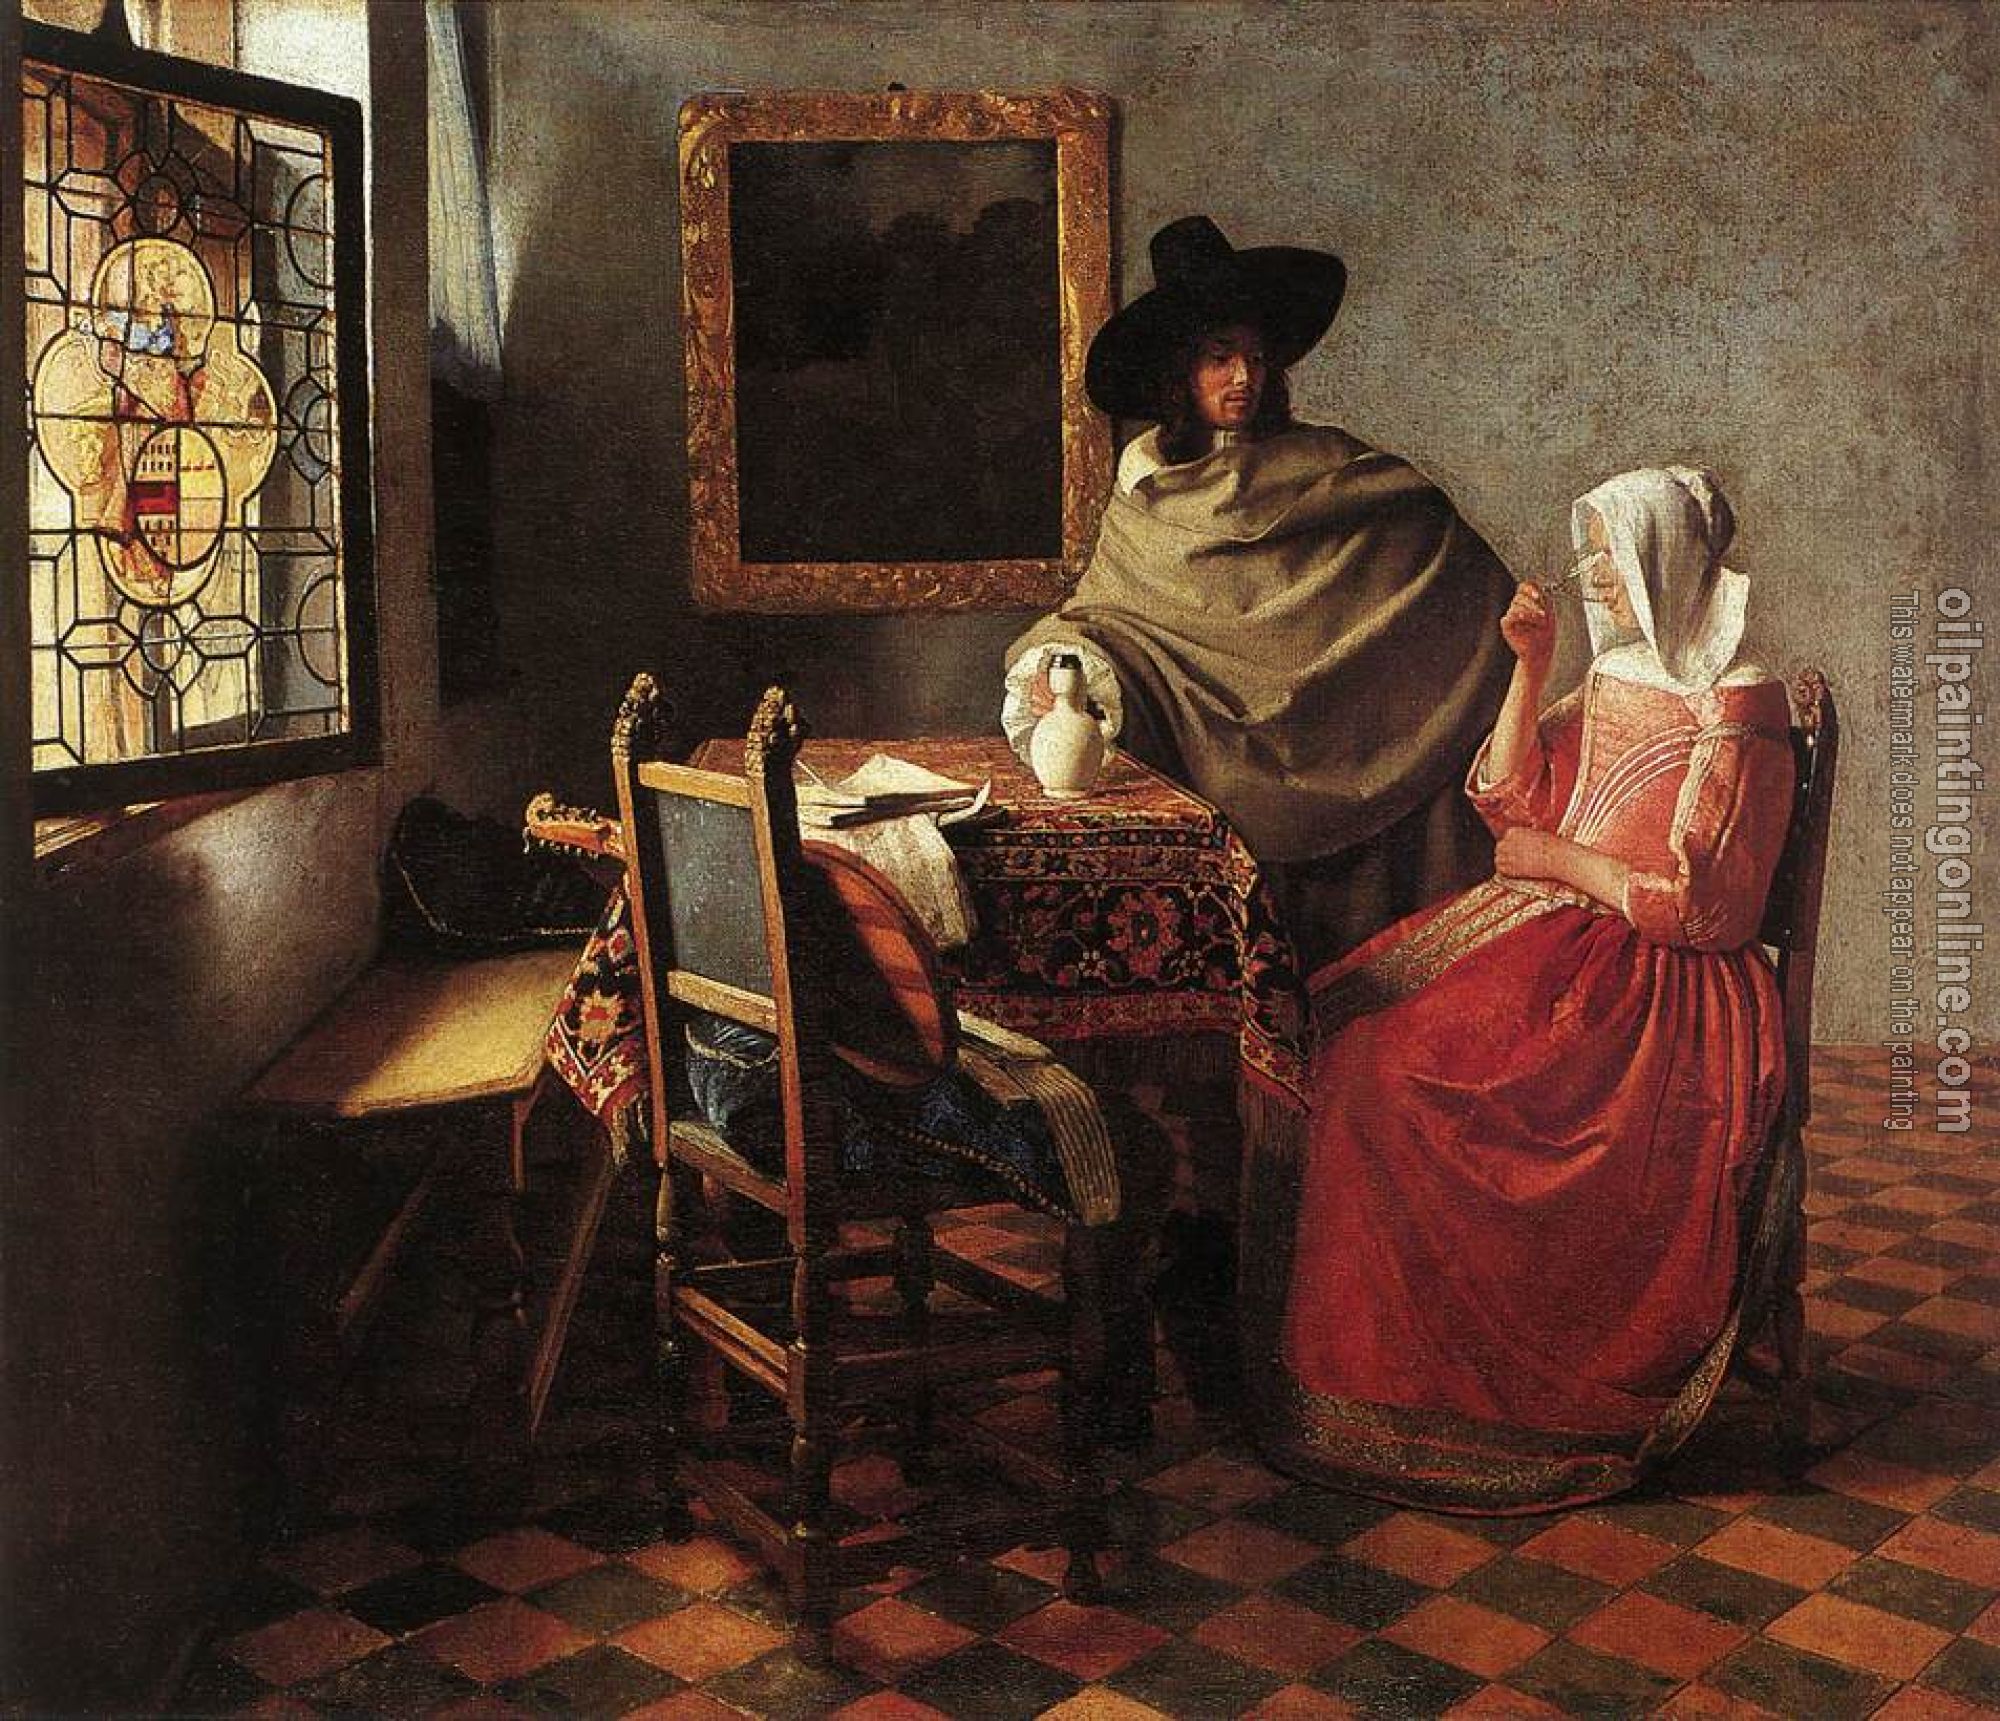 Vermeer, Jan - A Lady Drinking and a Gentleman